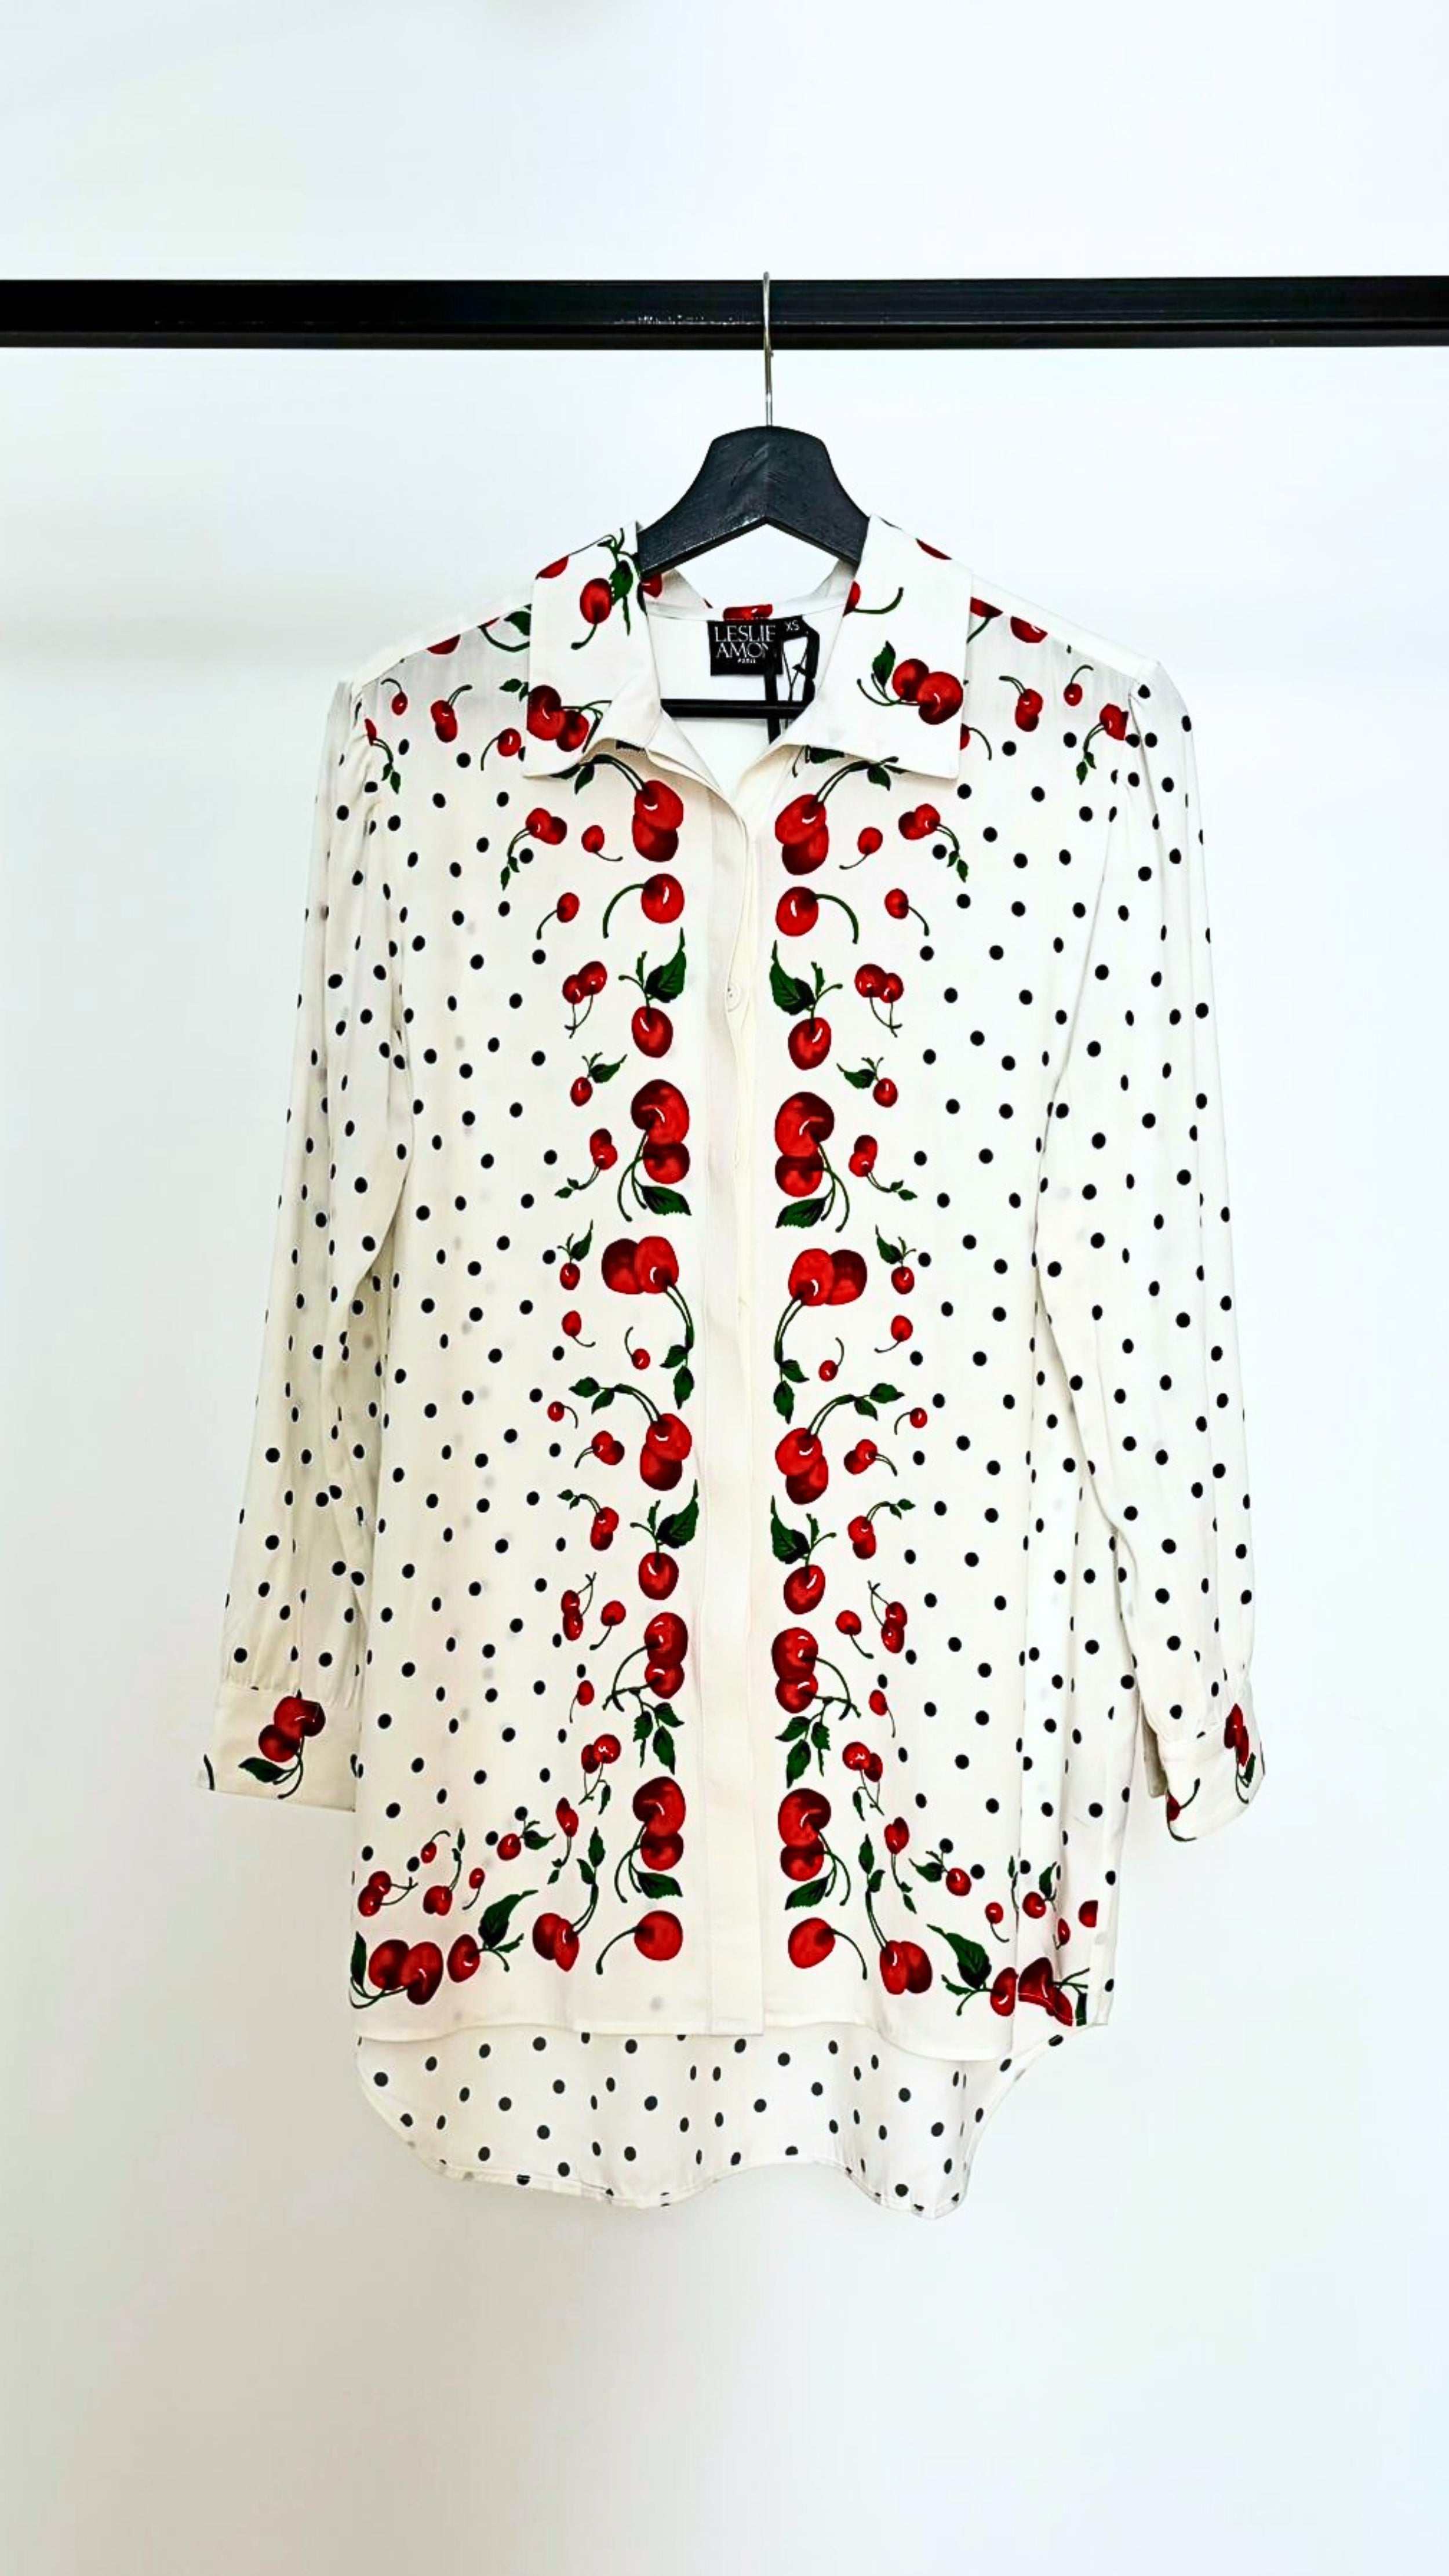 Leslie Amon Oversized Shirt in White Cherry. Oversized blouse in white with red cherry pattern. With button closures up the front, buttoned cuffs and collar. Product photo shown from the front.